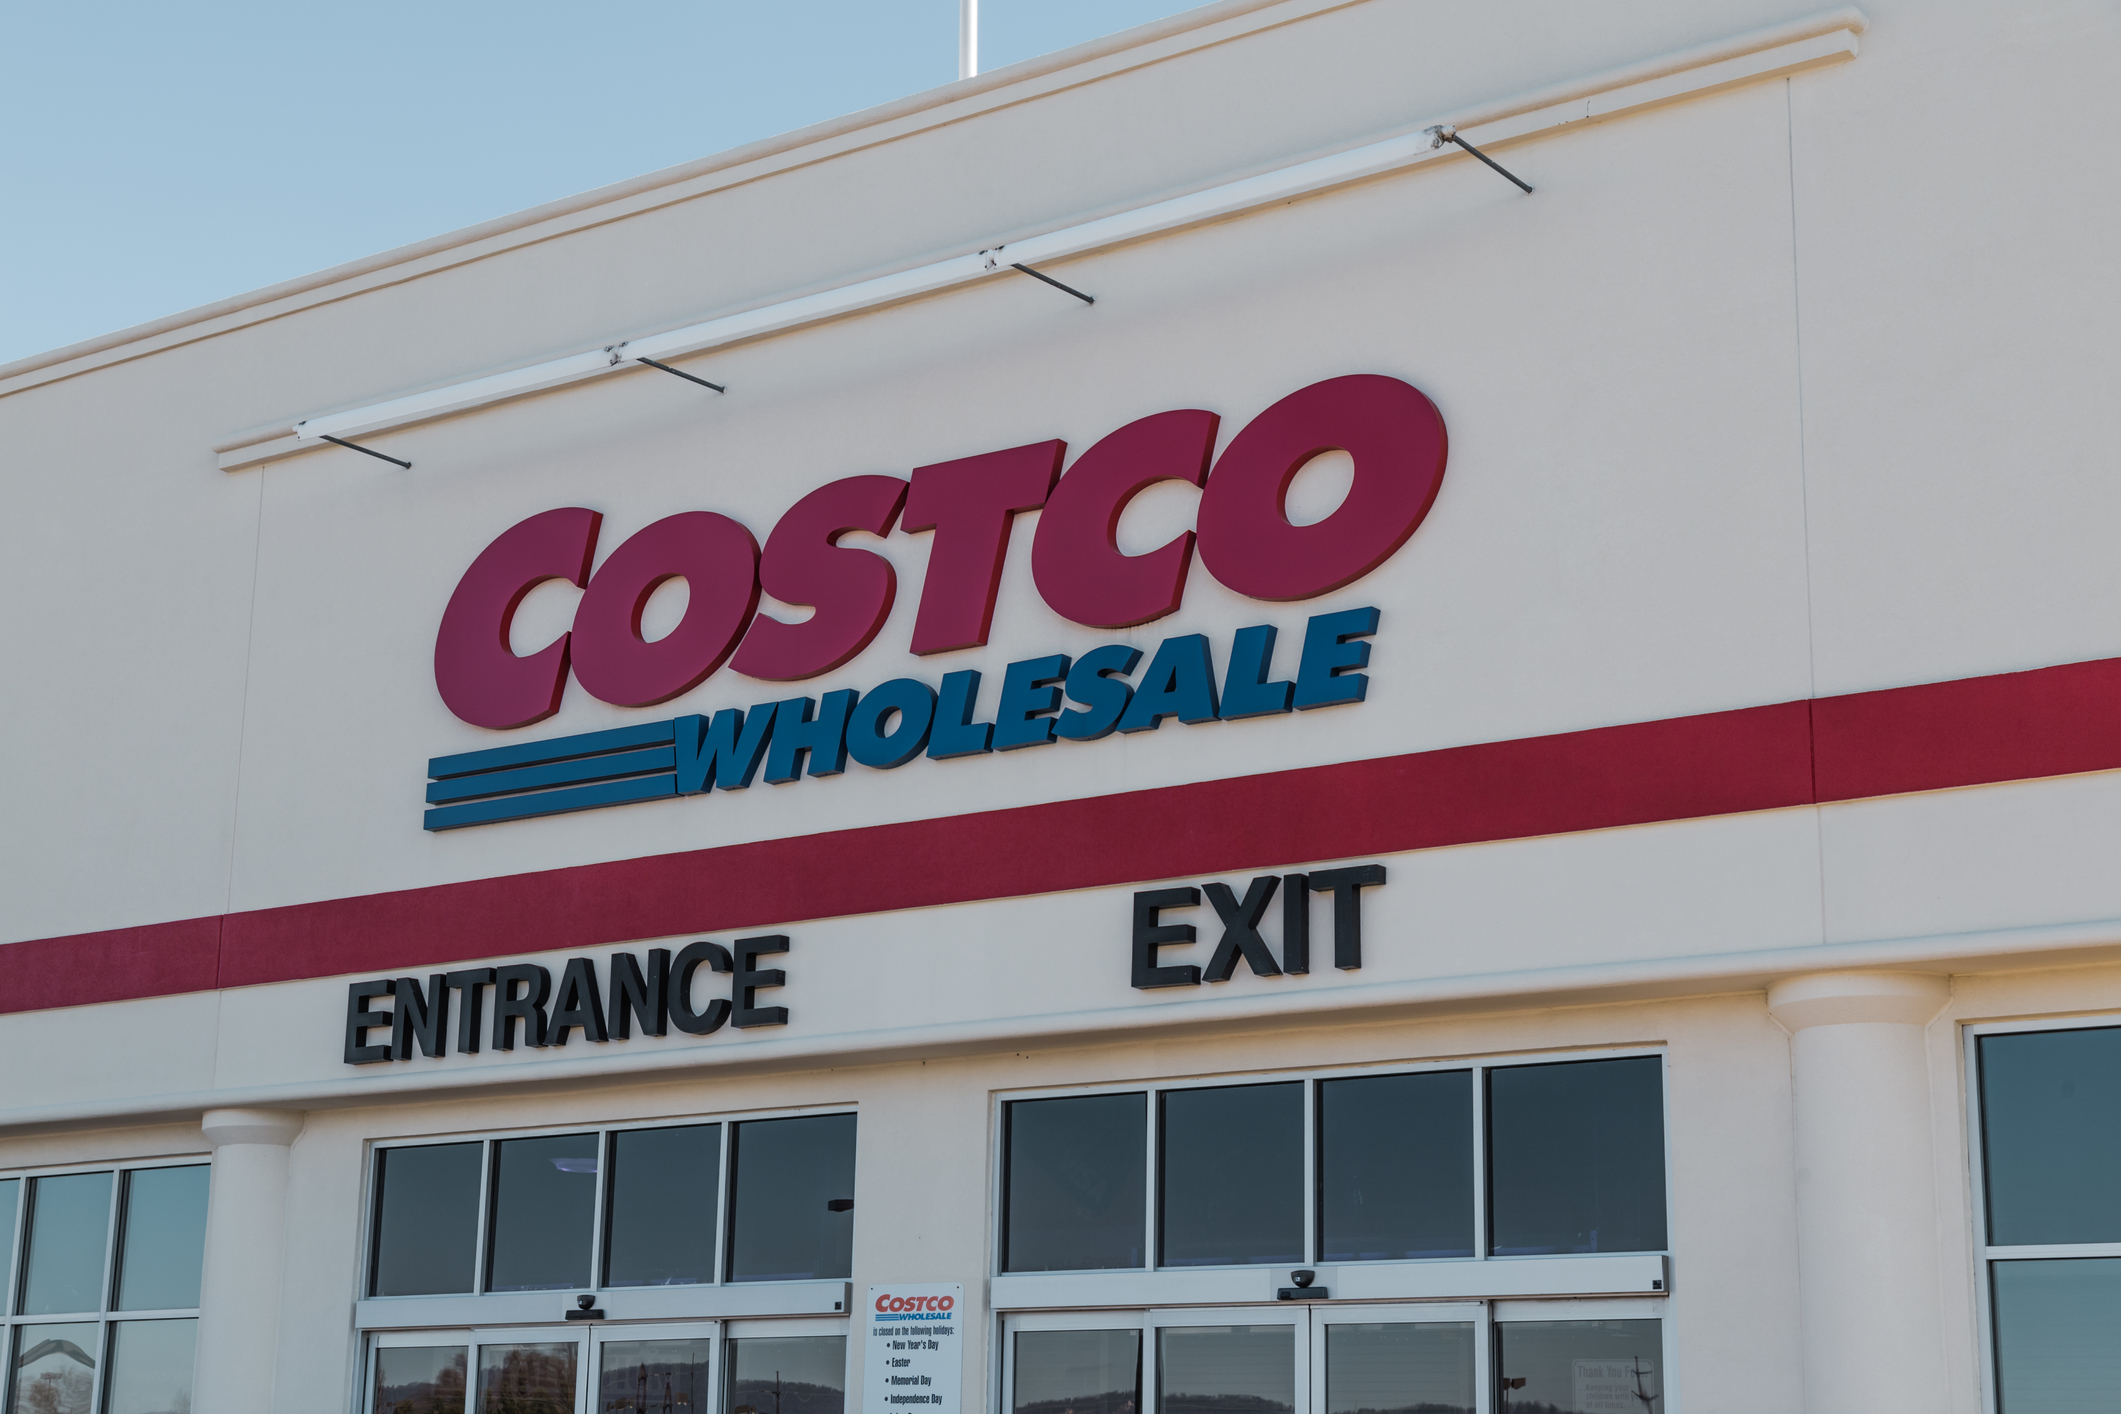 Today only: Get a $20 credit with $100 spend on same-day services at Costco